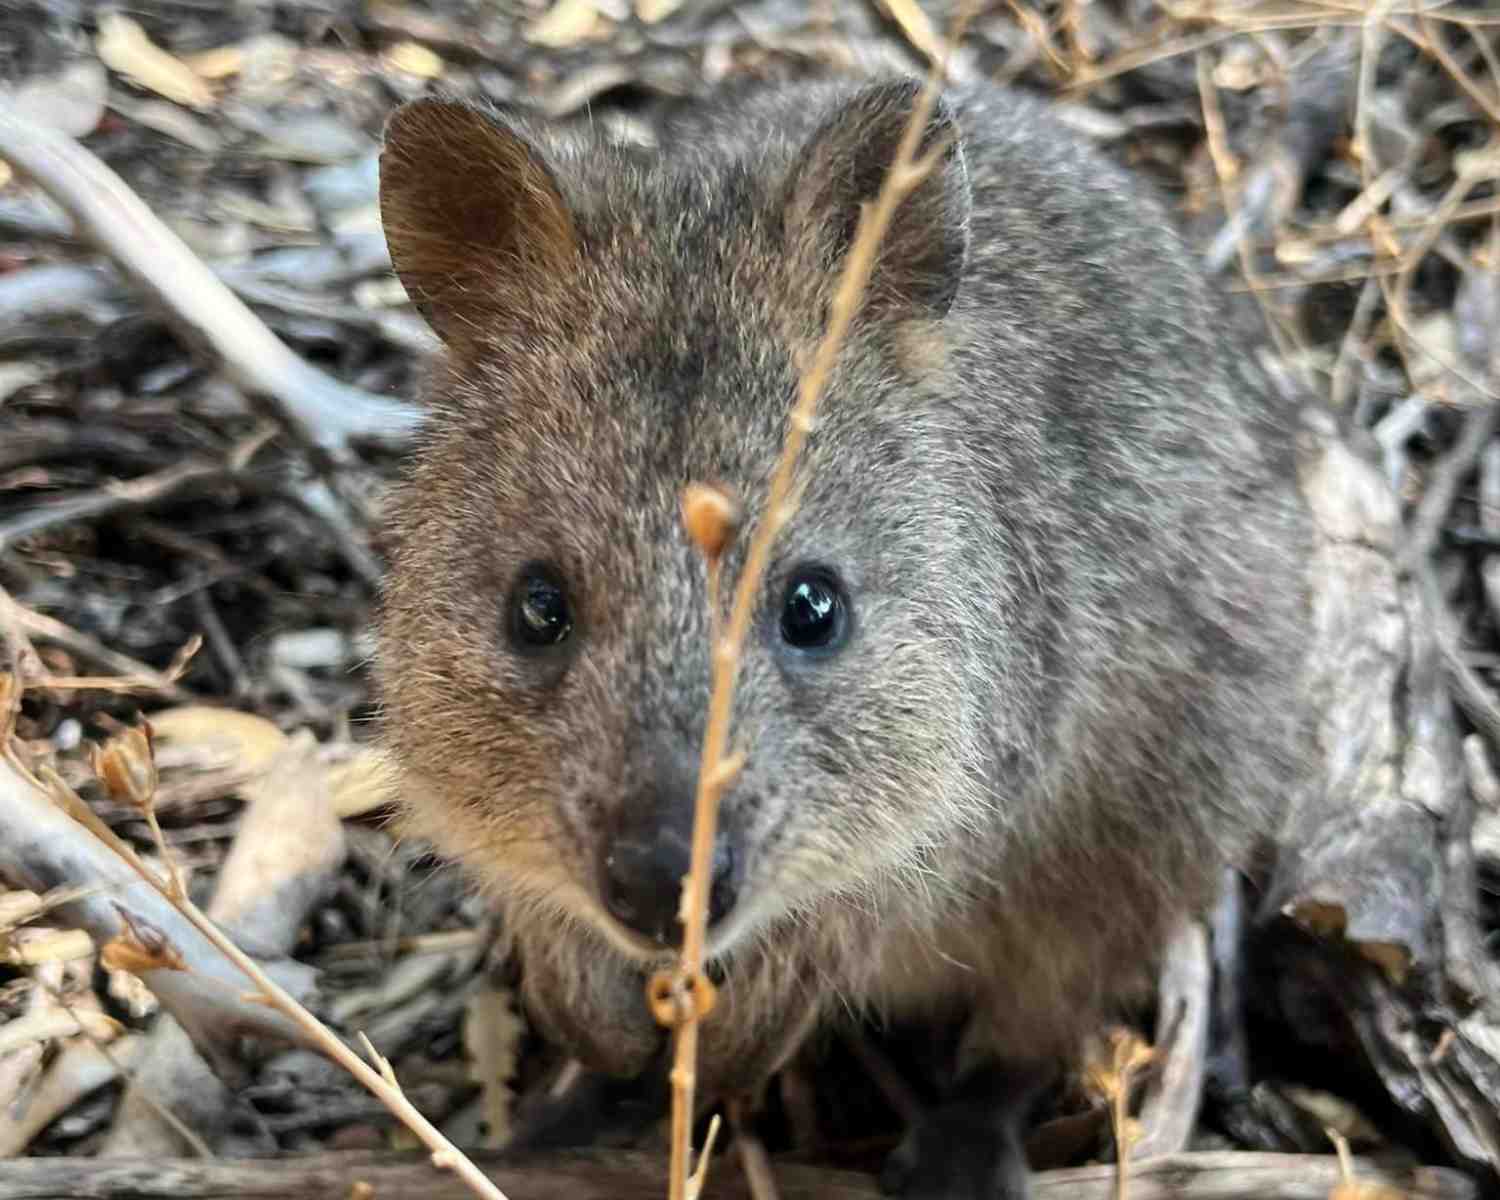 What is a quokka? Small marsupial found on Rottnest island